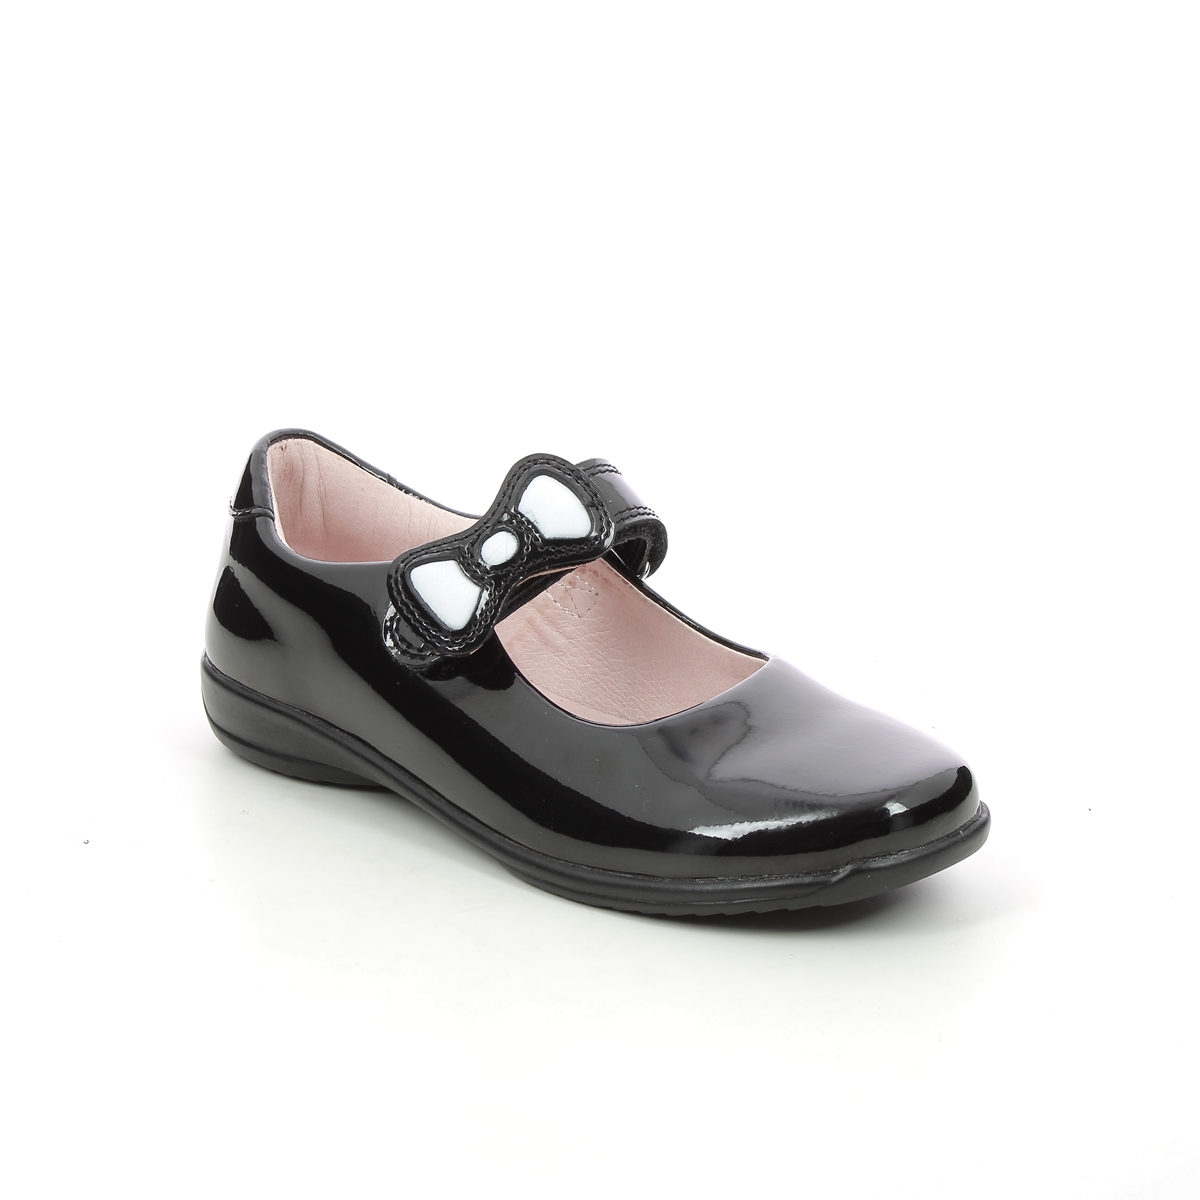 Lelli Kelly - Colourissima Bow F Fit In Black Patent Lk8802-Db01 In Size 28 In Plain Black Patent Girls Shoes  In Black Patent For School For kids